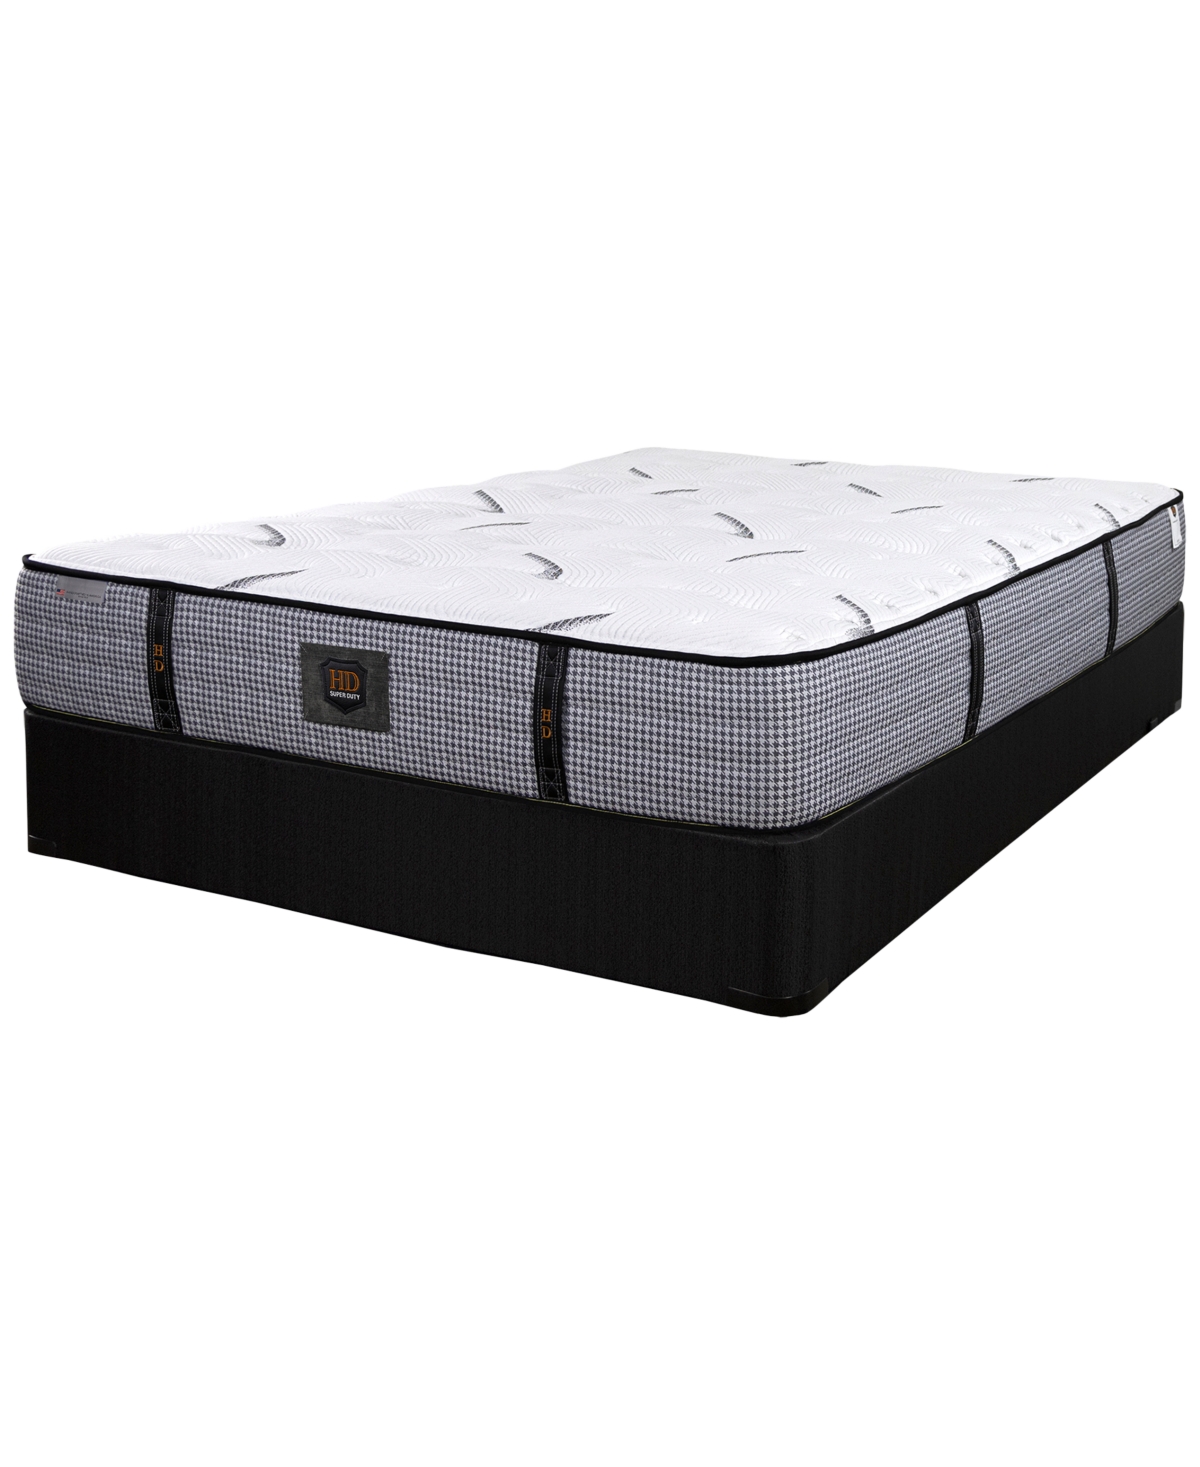 Paramount Hd Granite 11" Extra Firm Mattress In No Color